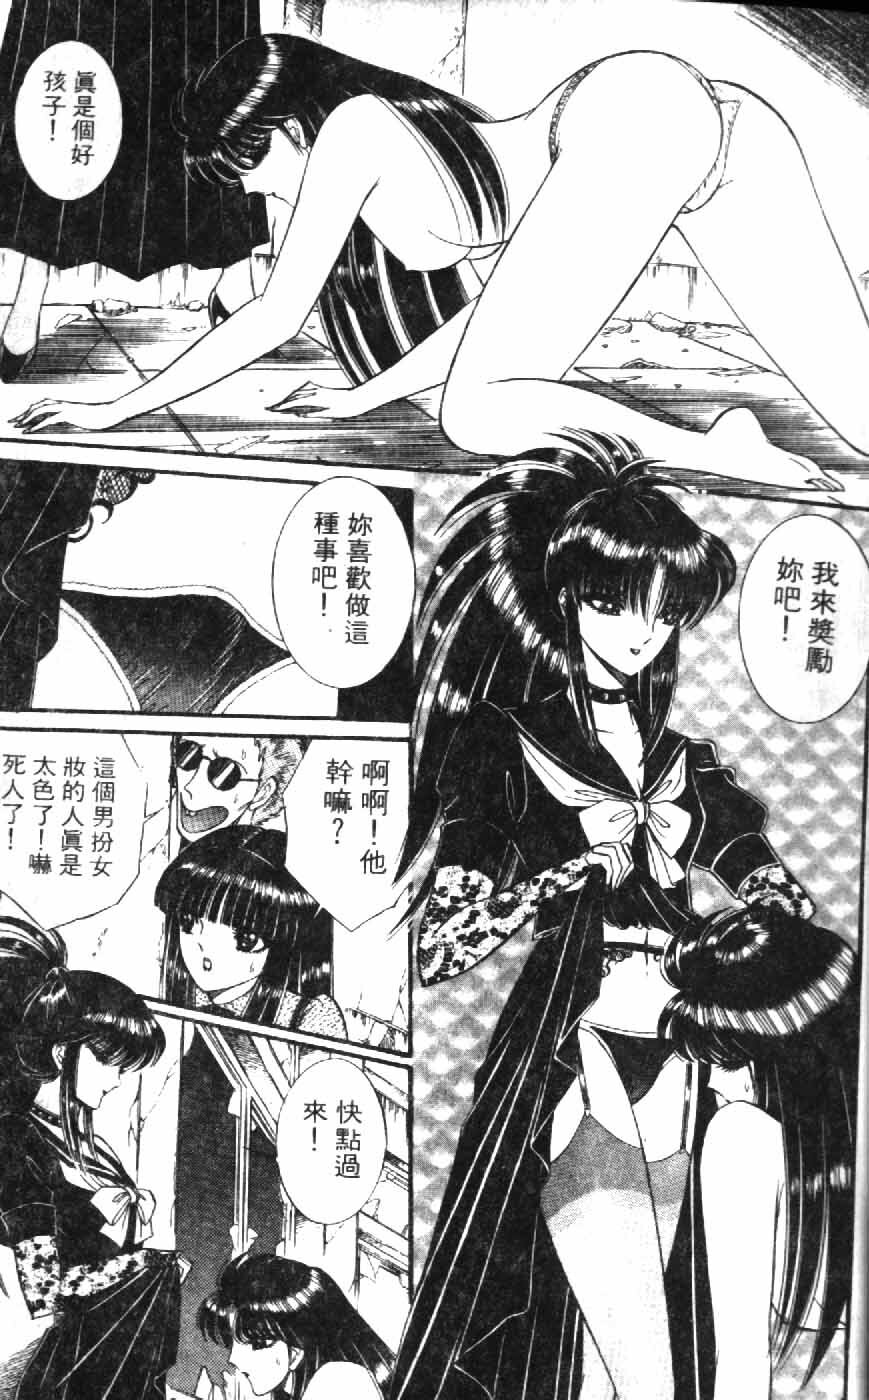 [Senno Knife] Ouma ga Horror Show 1 - Trans Sexual Special Show 1 | 顫慄博覽會 1 [Chinese] page 33 full